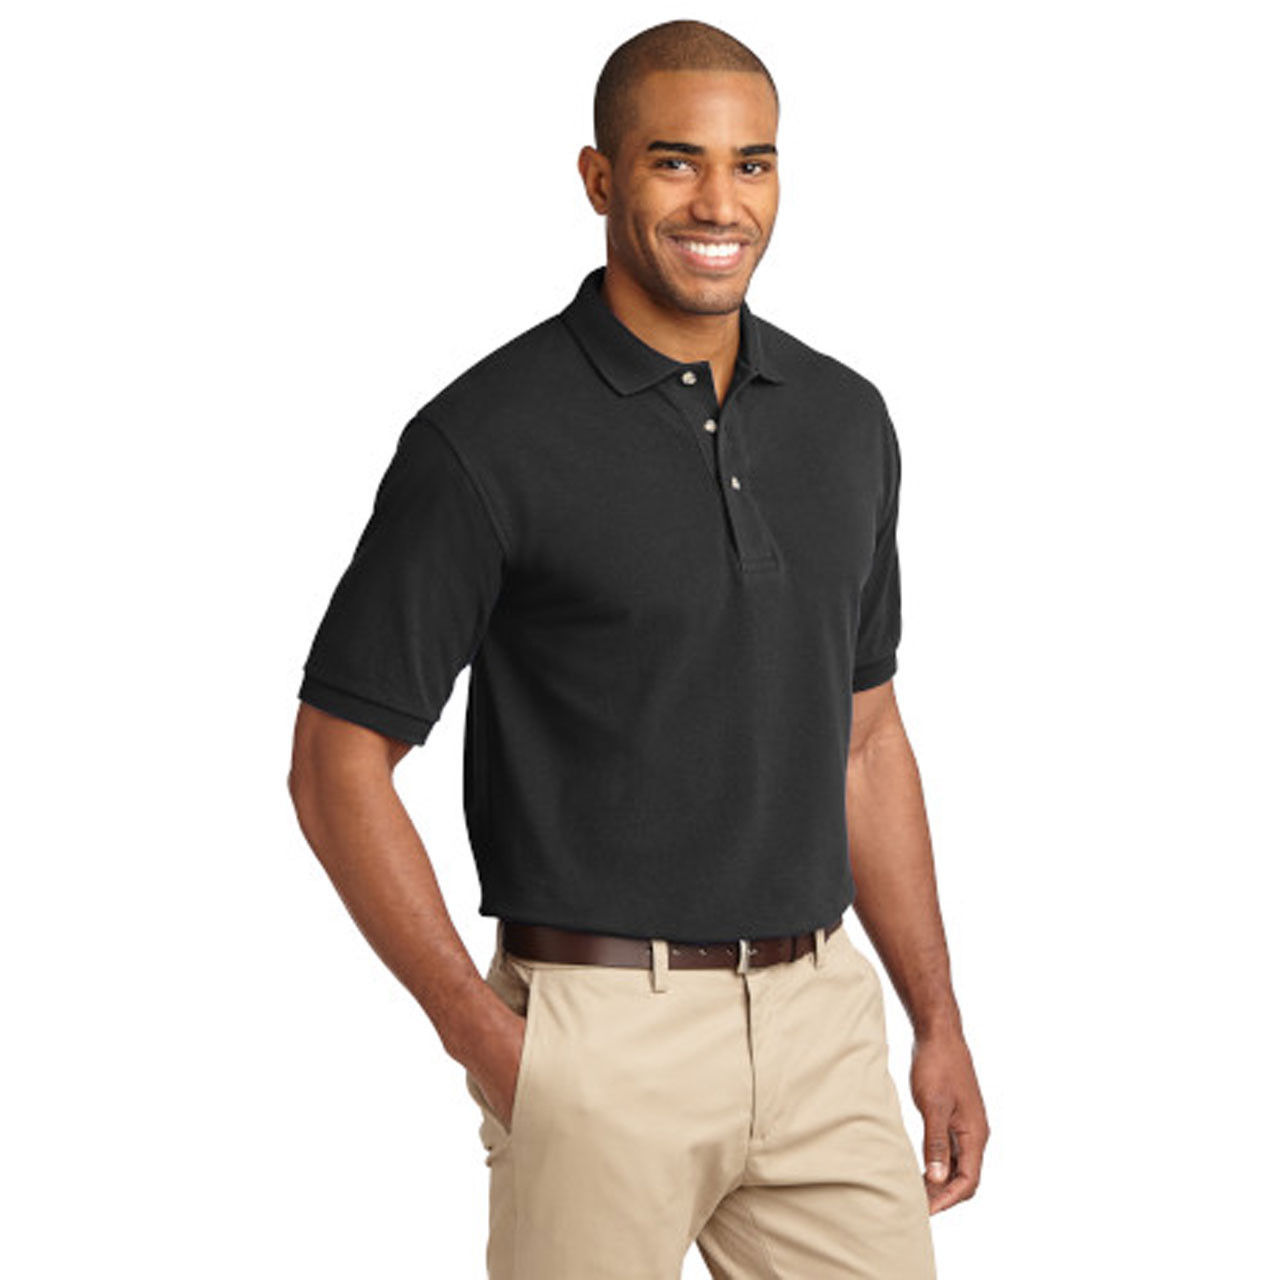 What collar and cuff type does the boxercraft wholesale polo s for men have?